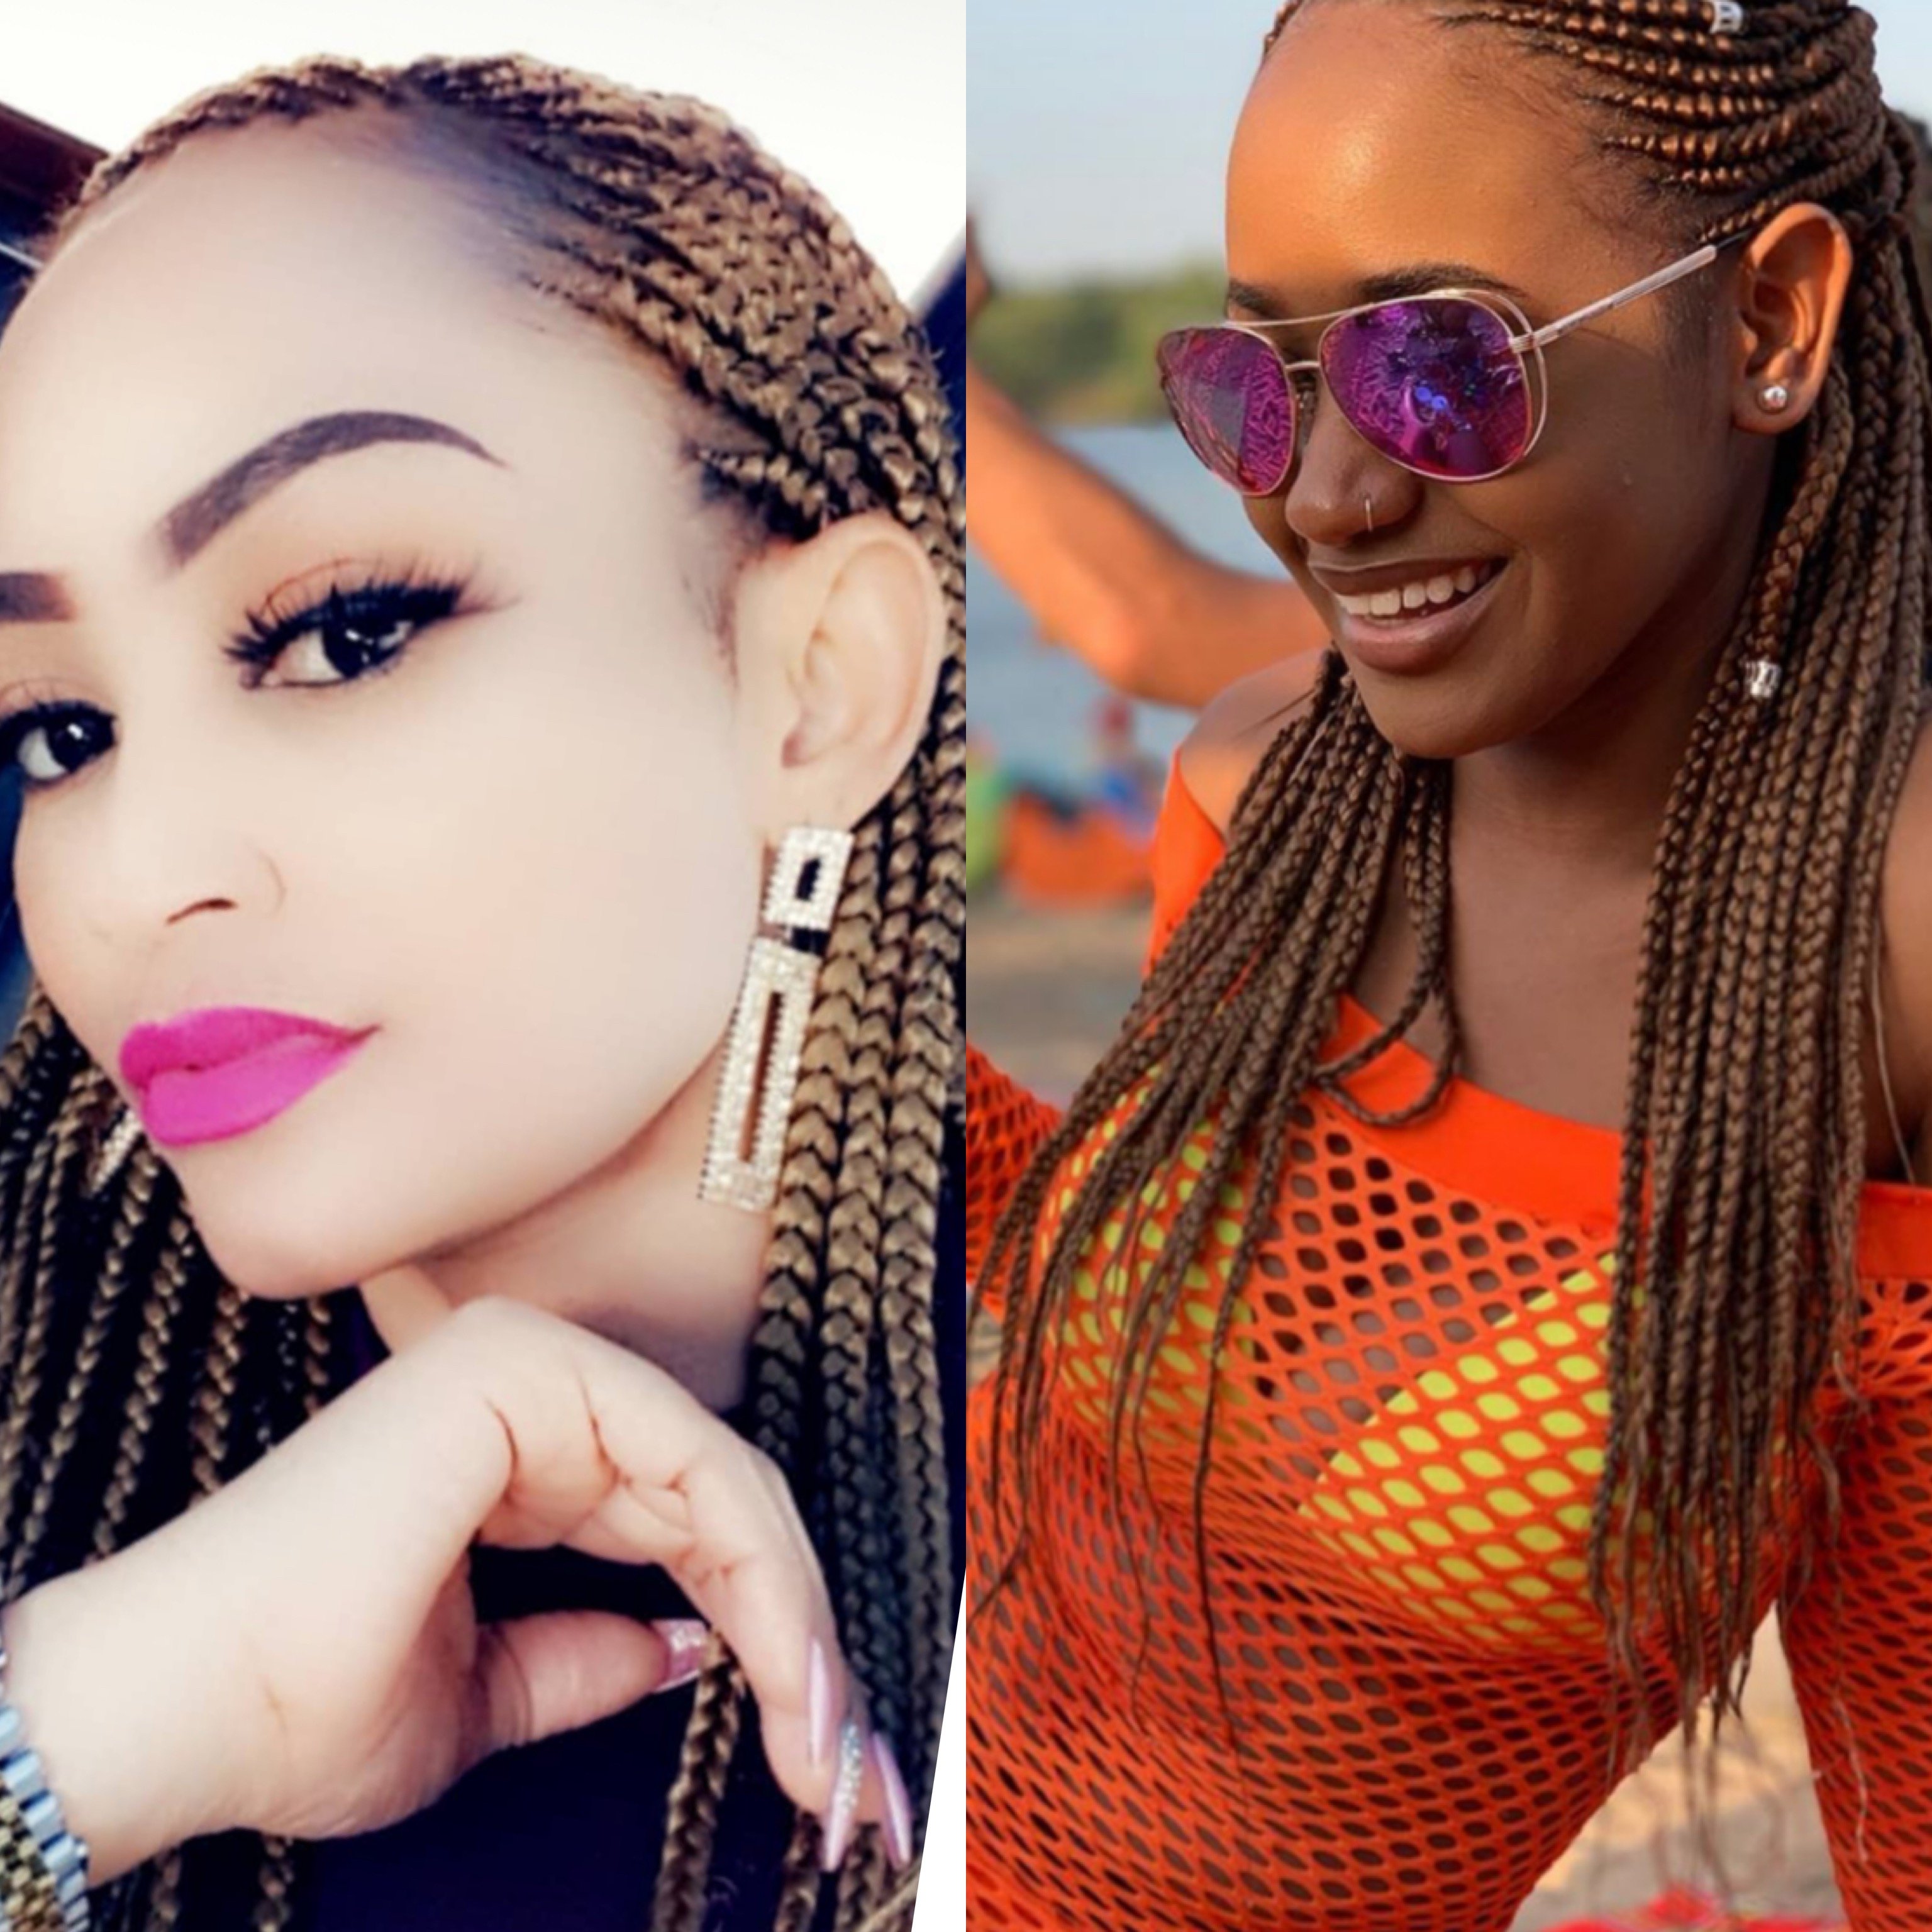 ‘You can’t be me: ’Diamond Platnumz former alleged Kenyan sidechick shades Zari for copying her style!